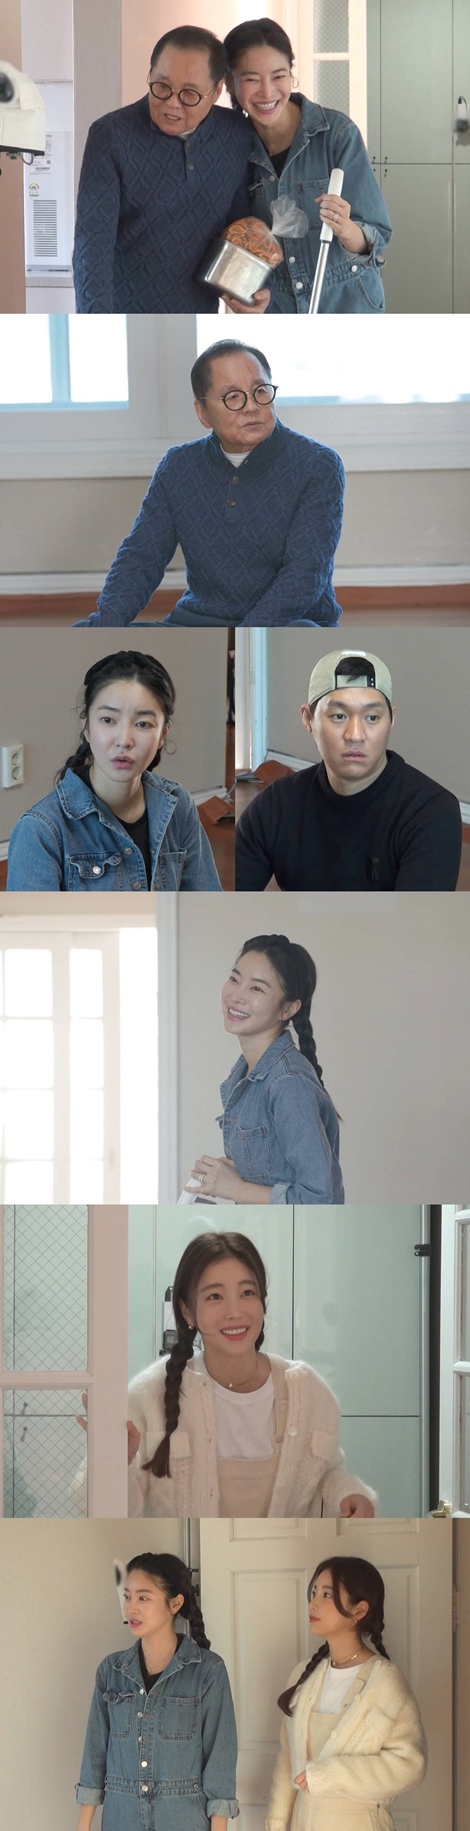 On SBS Same Bed, Different Dreams 22 - You Are My Destiny (hereinafter referred to as You Are My Destiny), which is broadcasted at 11:10 pm on the 28th (Monday), Kim Yoon-ji and Choi Woo-sungs ups and downs honeymoon life will be revealed.Recently, Kim Yoon-ji and Choi Woo-sung left their newlyweds house and moved to the building where their parents, Lee Sang-hae and Kim Young-im, live.While her daughter-in-law Kim Yoon-ji actively promoted the move, her husband Choi Woo-sung opposed the move.Kim Yoon-ji and Choi Woo-sung, Lee Sang-hae and Kim Young-im, who lived in the upper house and lower house. Kim Yoon-ji and Choi Woo-sung, who are preparing to move, visited the house.Strangely, he made a bomb remark to his daughter-in-law Kim Yoon-ji, who lived in a building, and stunned Kim Yoon-ji.It raises the question of what the bomb remarks of the strange year that made the daughter-in-laws conversation cool.Kim Yoon-ji later became the Top Model for Self Interiors.Kim Yoon-ji has prepared a variety of equipment and invited actor Ki Eun-se as an assistant to raise expectations.Ki Eun-se, known as the god of Interiors, has become a hot topic by revealing the European Sensibility House, which I personally have Interiors, to SNS.Ki Eun-se is the back door of the 2022 fashion interiors honey tips as well as professional force to reveal the advanced skills generously, and everyones admiration.Ki Eun-ses Interiors know-how, which is as good as an expert, is released through broadcasting.Meanwhile, while Kim Yoon-ji was away for a while, suspicious actions of her husband Choi Woo-sung and Ki Eun-se were captured.Choi Woo-sung secretly planned a secret work with Ki Eun-se, Kim Yoon-ji, who learned this late, eventually shed tears.Kim Yoon-ji Choi Woo-sungs Self Interiors Top Model with Ki Eun-se, the god of Interiors, can be seen on SBS You Are My Destiny, which is broadcasted at 11:10 pm on the 28th (Mon).